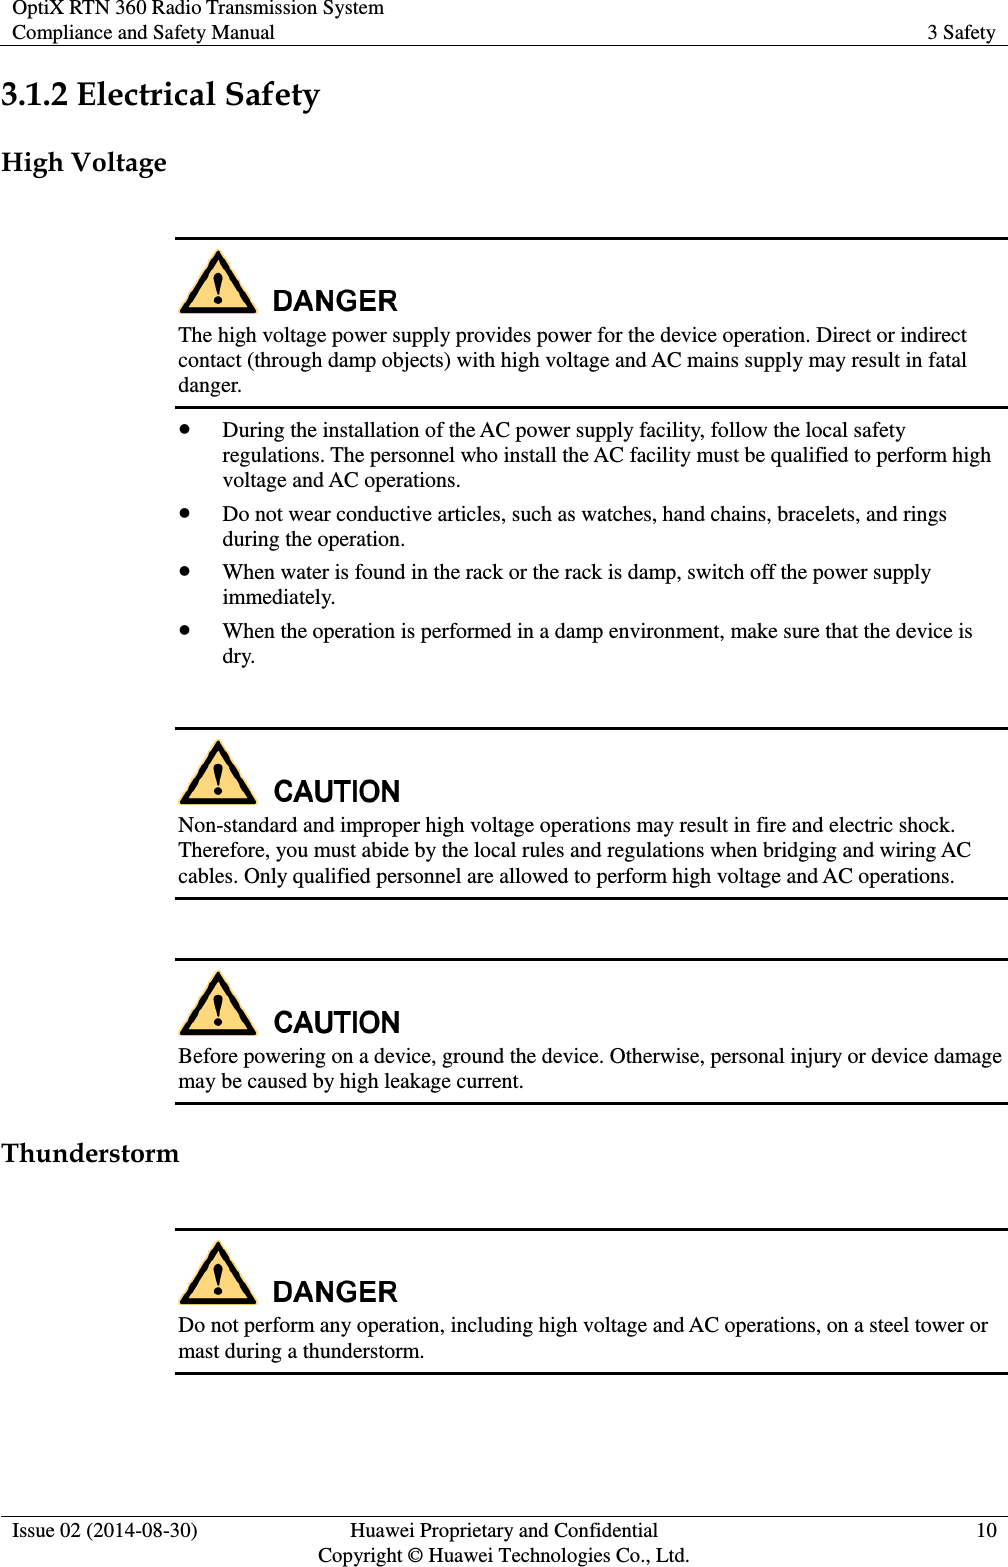 OptiX RTN 360 Radio Transmission System Compliance and Safety Manual 3 Safety  Issue 02 (2014-08-30) Huawei Proprietary and Confidential                                     Copyright © Huawei Technologies Co., Ltd. 10  3.1.2 Electrical Safety High Voltage   The high voltage power supply provides power for the device operation. Direct or indirect contact (through damp objects) with high voltage and AC mains supply may result in fatal danger.  During the installation of the AC power supply facility, follow the local safety regulations. The personnel who install the AC facility must be qualified to perform high voltage and AC operations.  Do not wear conductive articles, such as watches, hand chains, bracelets, and rings during the operation.  When water is found in the rack or the rack is damp, switch off the power supply immediately.  When the operation is performed in a damp environment, make sure that the device is dry.   Non-standard and improper high voltage operations may result in fire and electric shock. Therefore, you must abide by the local rules and regulations when bridging and wiring AC cables. Only qualified personnel are allowed to perform high voltage and AC operations.     Before powering on a device, ground the device. Otherwise, personal injury or device damage may be caused by high leakage current. Thunderstorm   Do not perform any operation, including high voltage and AC operations, on a steel tower or mast during a thunderstorm. 